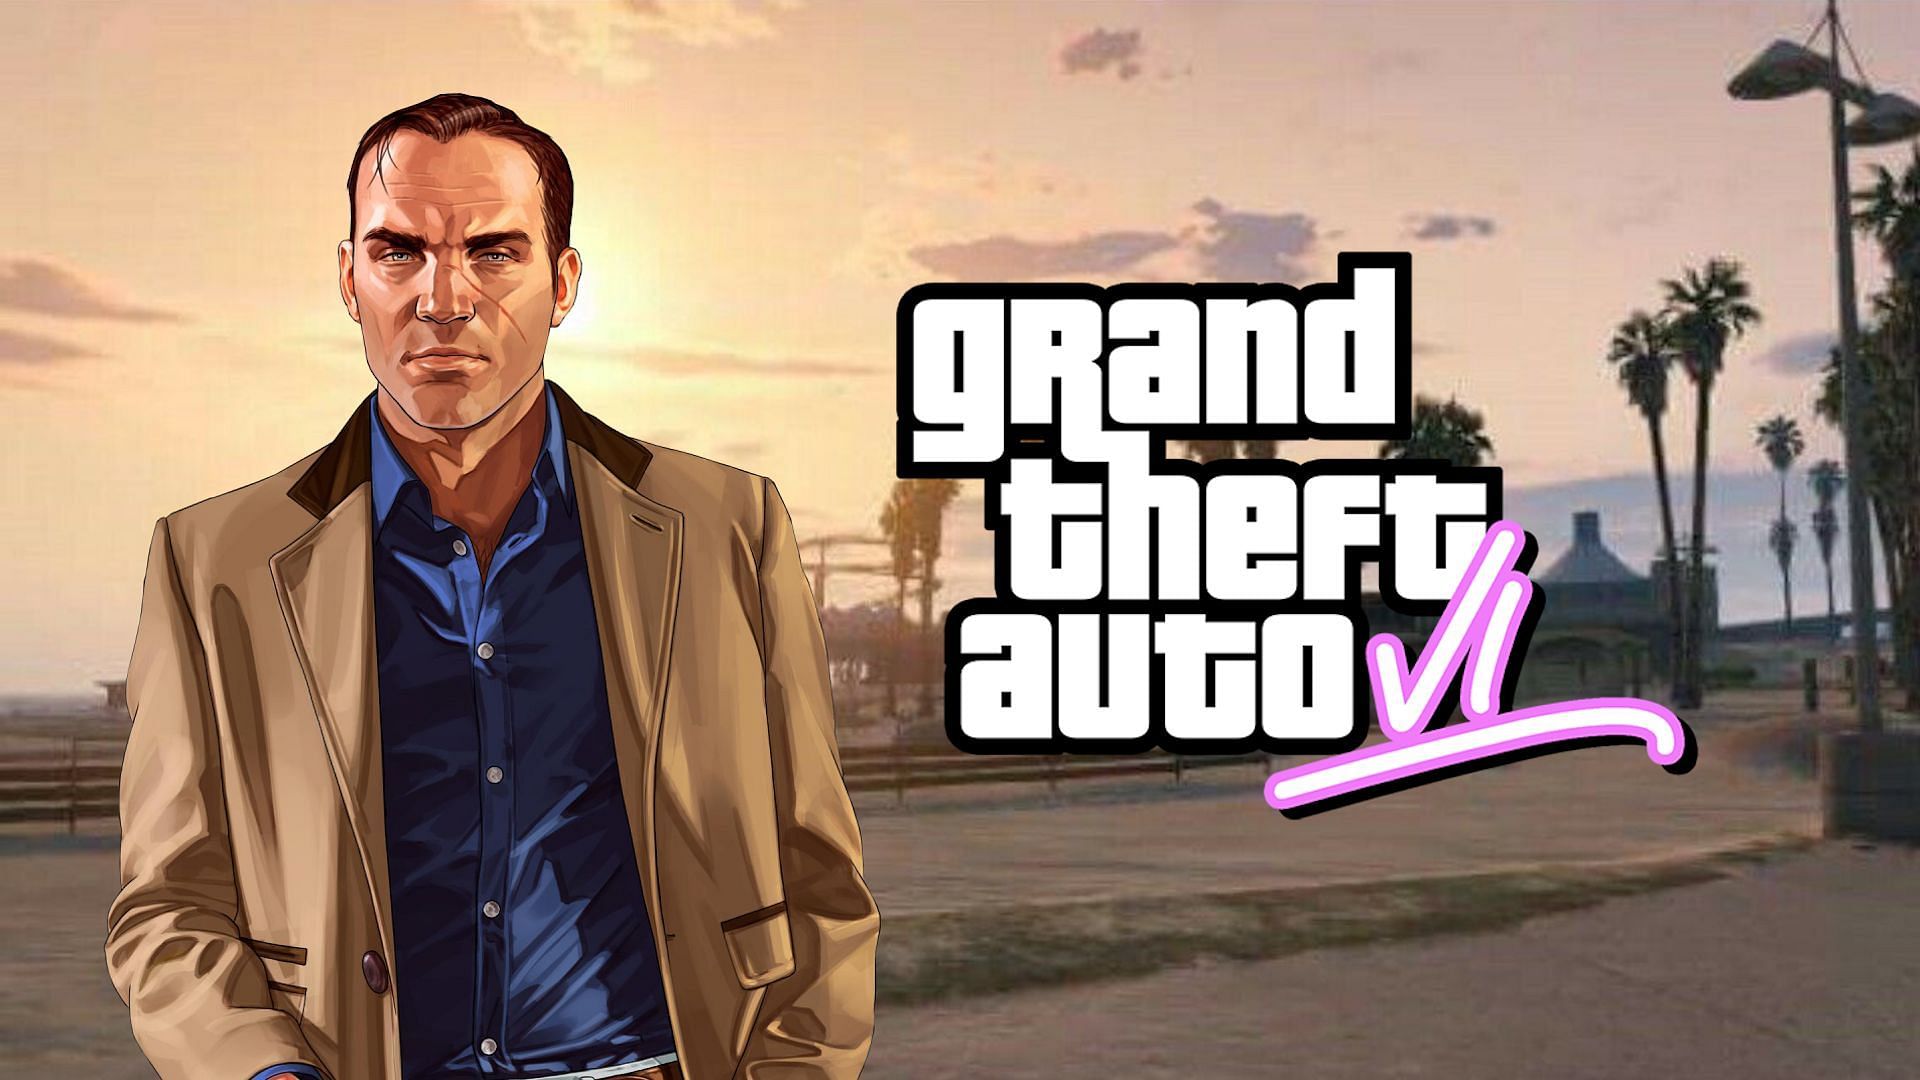 Why $150 is an unrealistic price for GTA 6, even if it has a 1